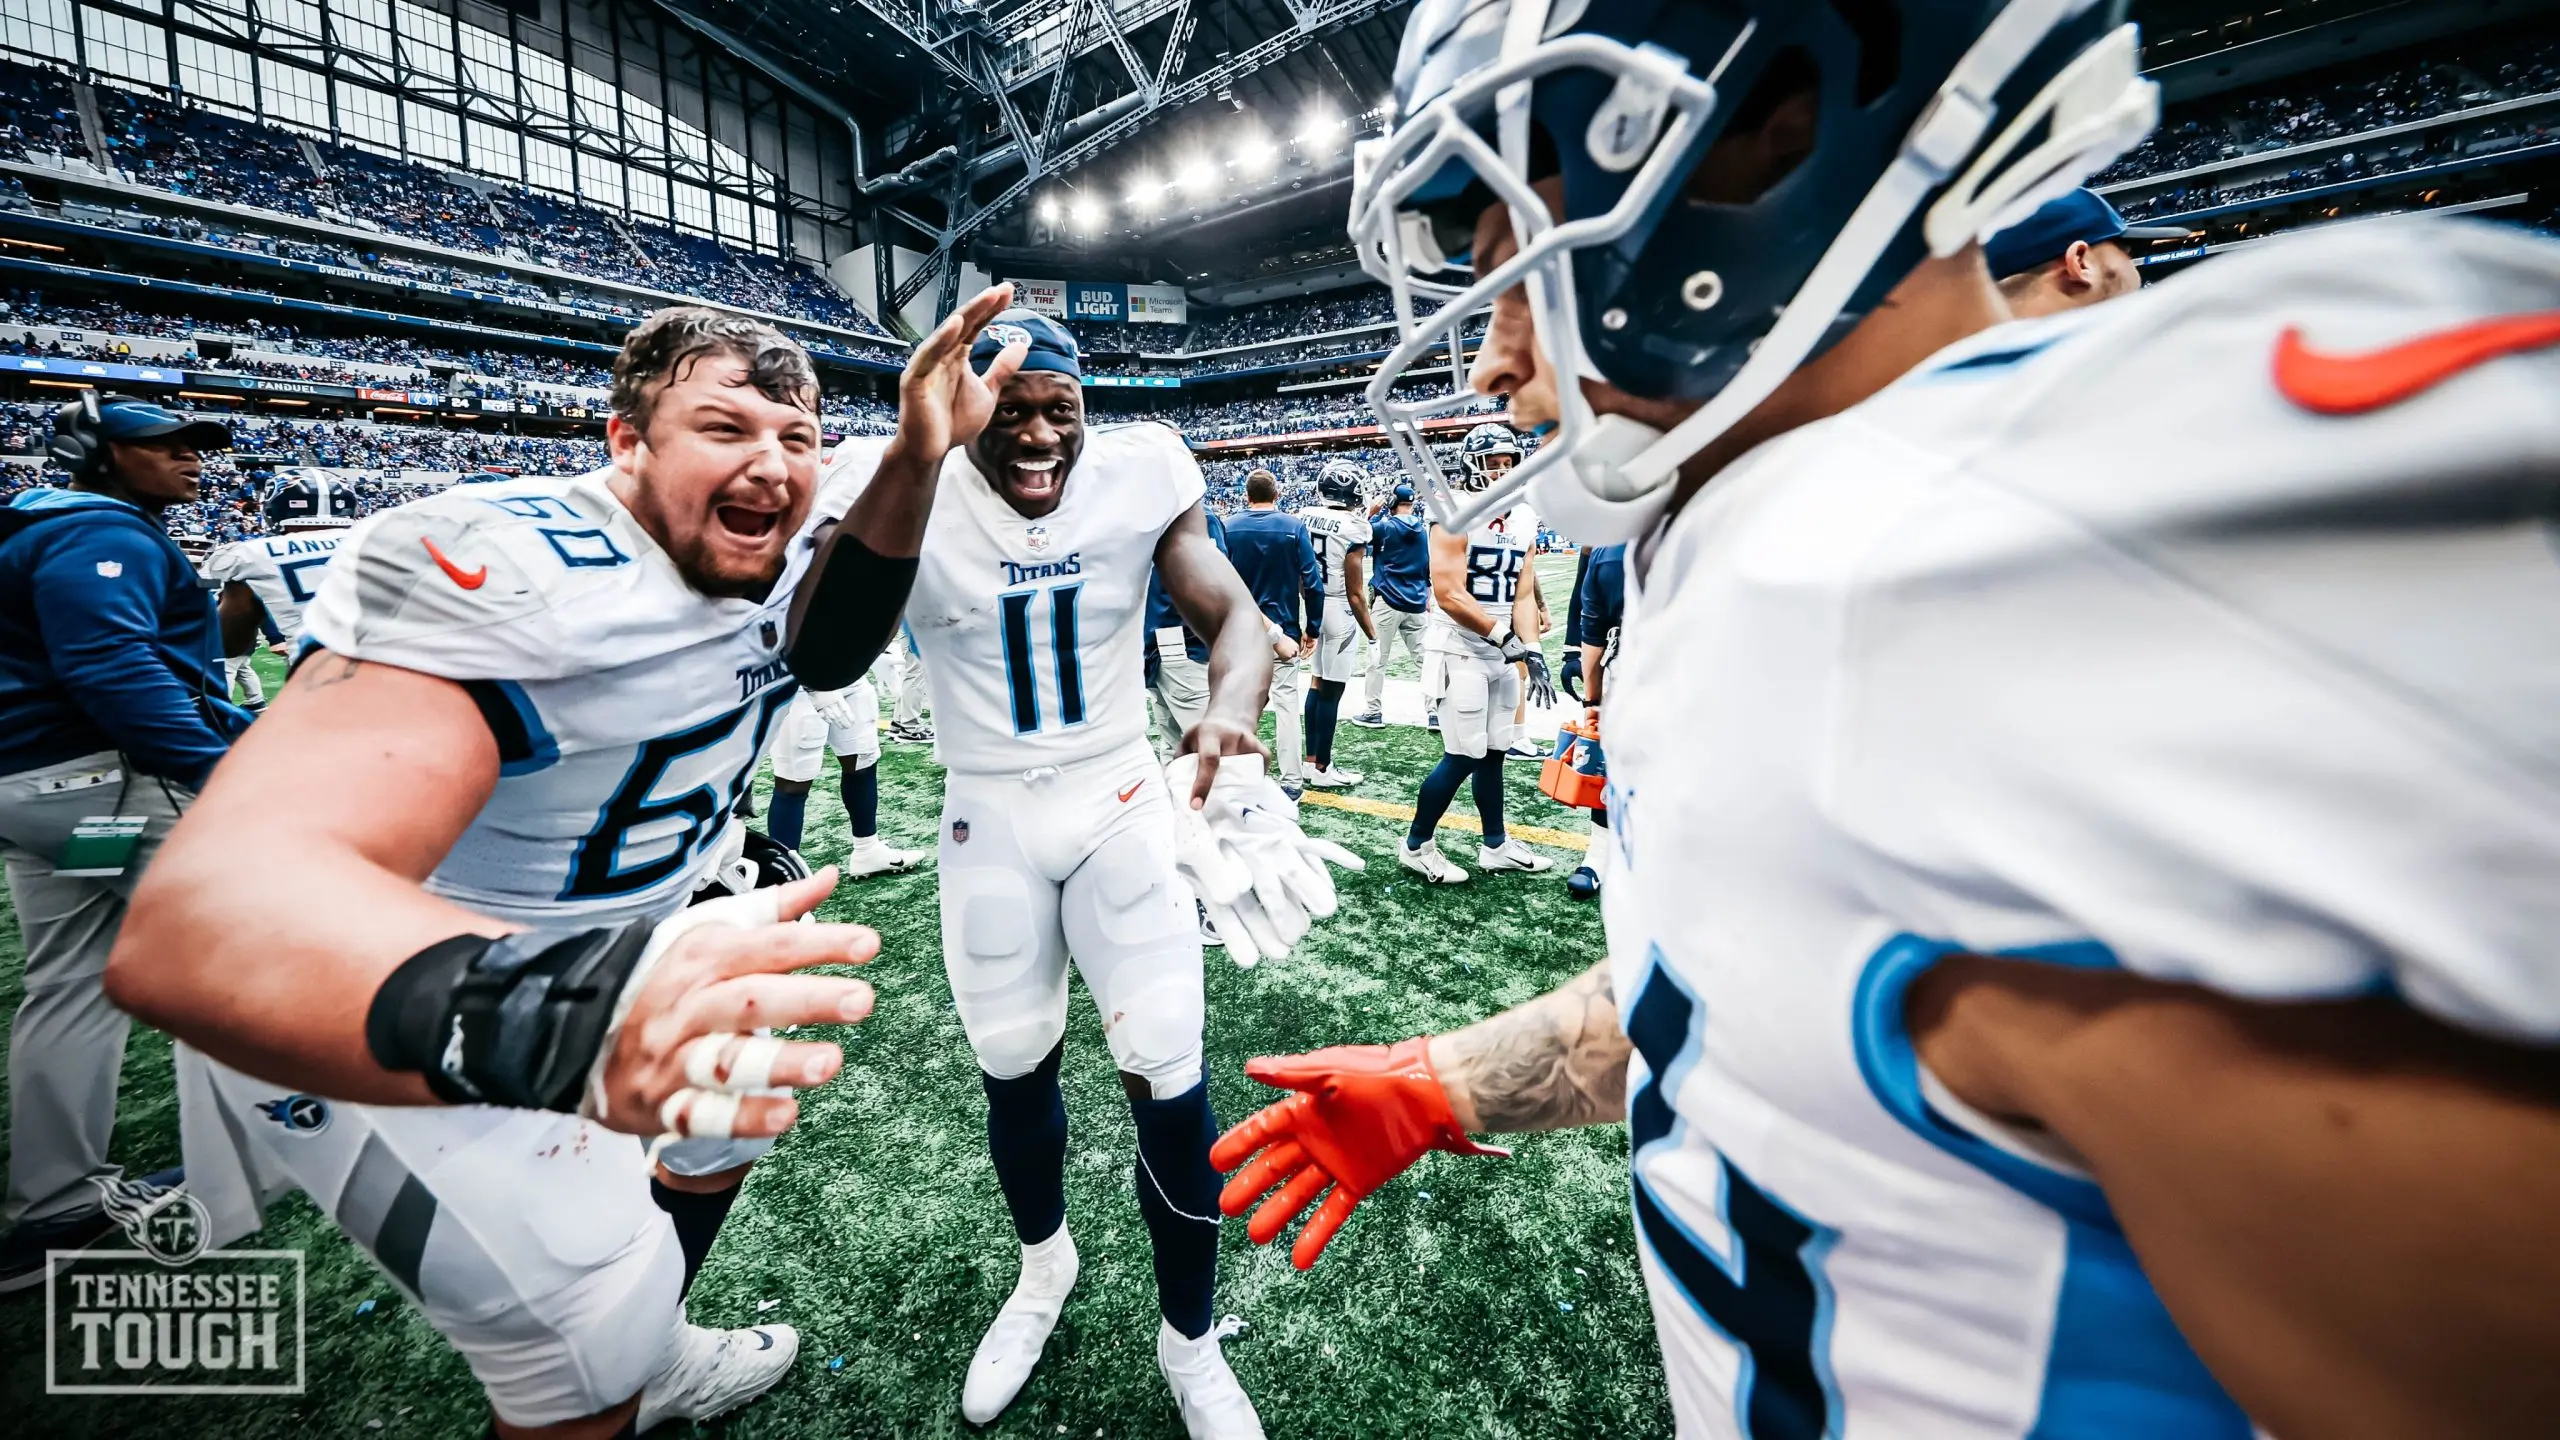 Tennessee Titans vence Indianapolis Colts NFL 2021 semana 8